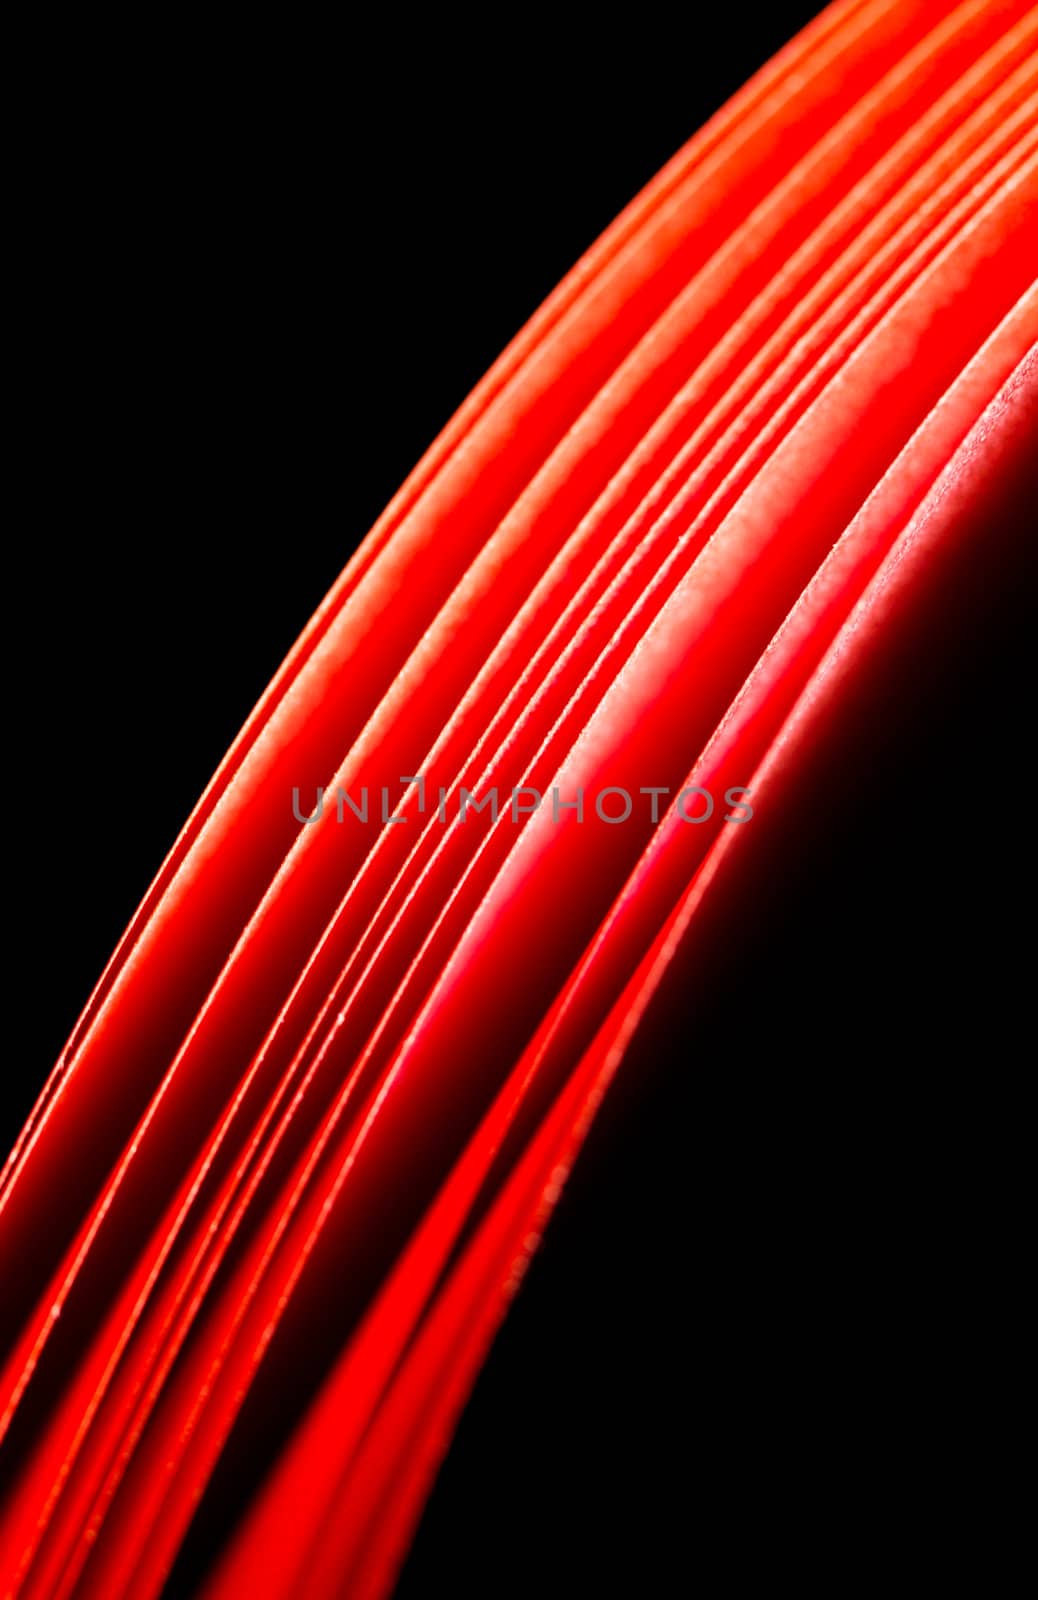 red A4 paper glows when illuminated by light and can be seen as flowing red from top edge in portrait orientation